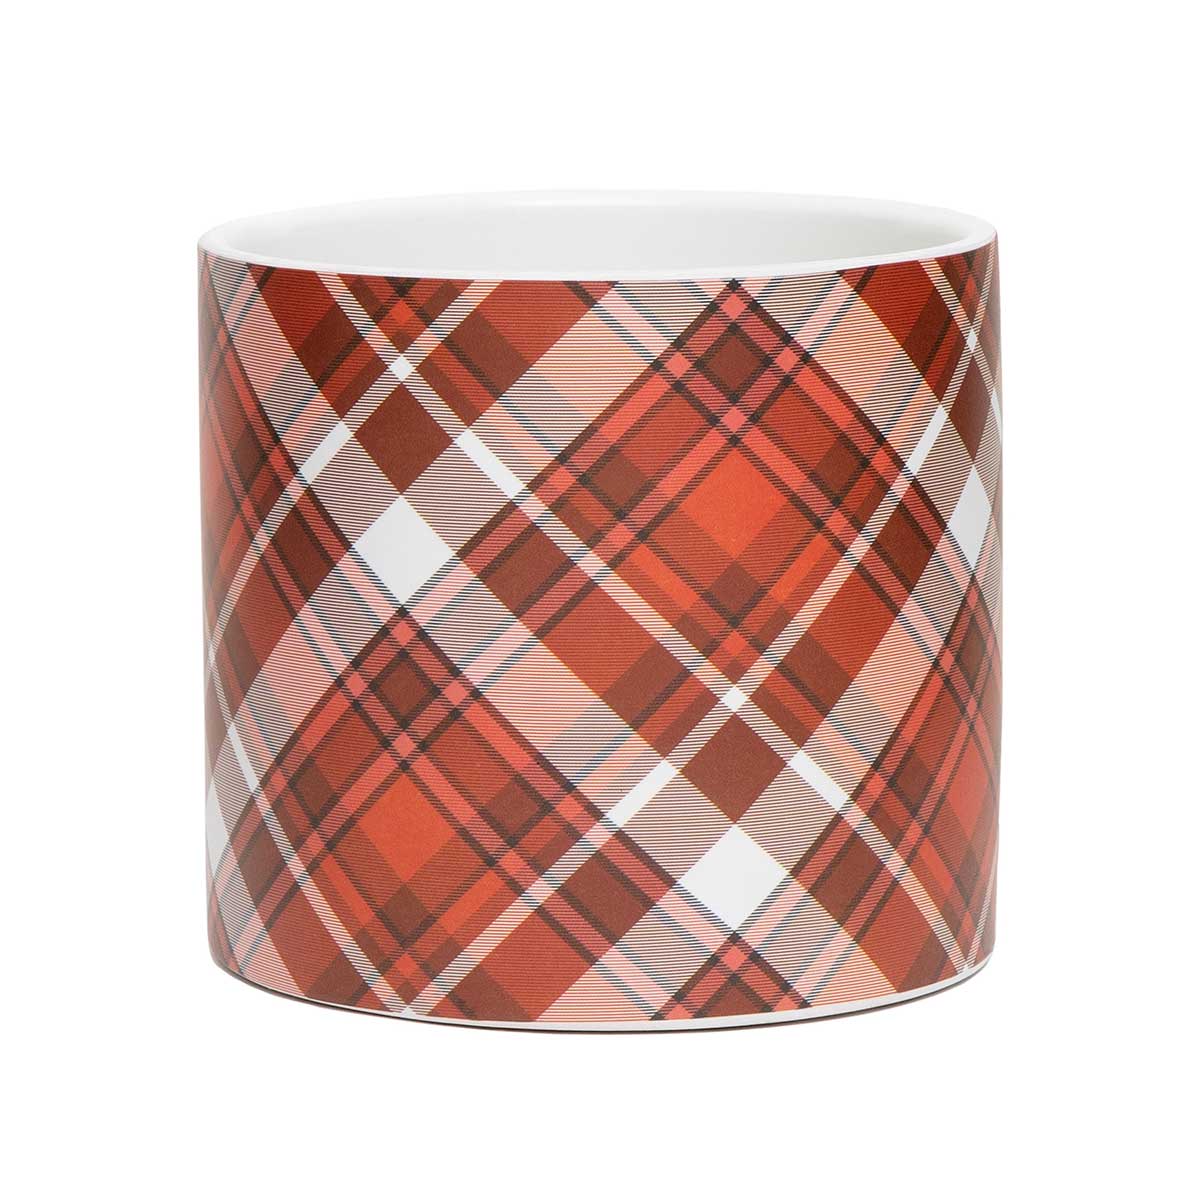 POT CHRISTMAS PLAID LARGE 5.25IN X 4.75IN CERAMIC